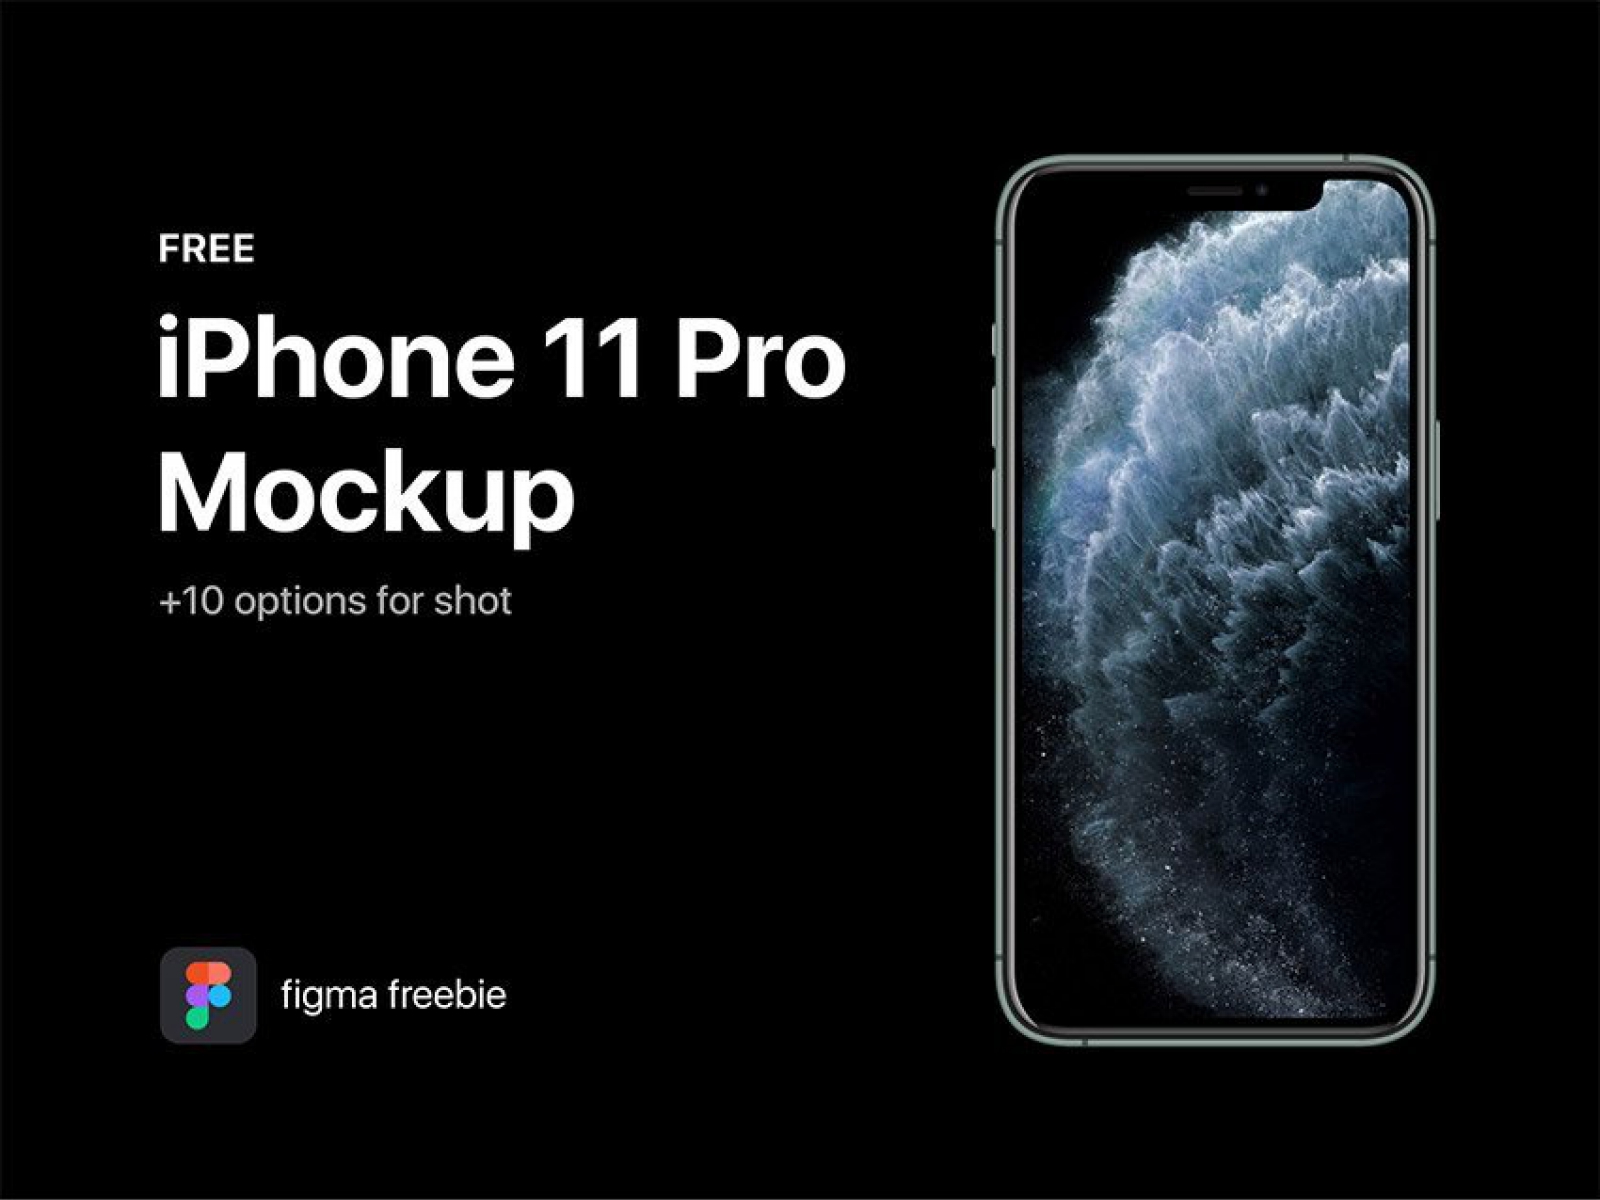 Free iPhone 11 Pro Mockup for Figma and Adobe XD No 1